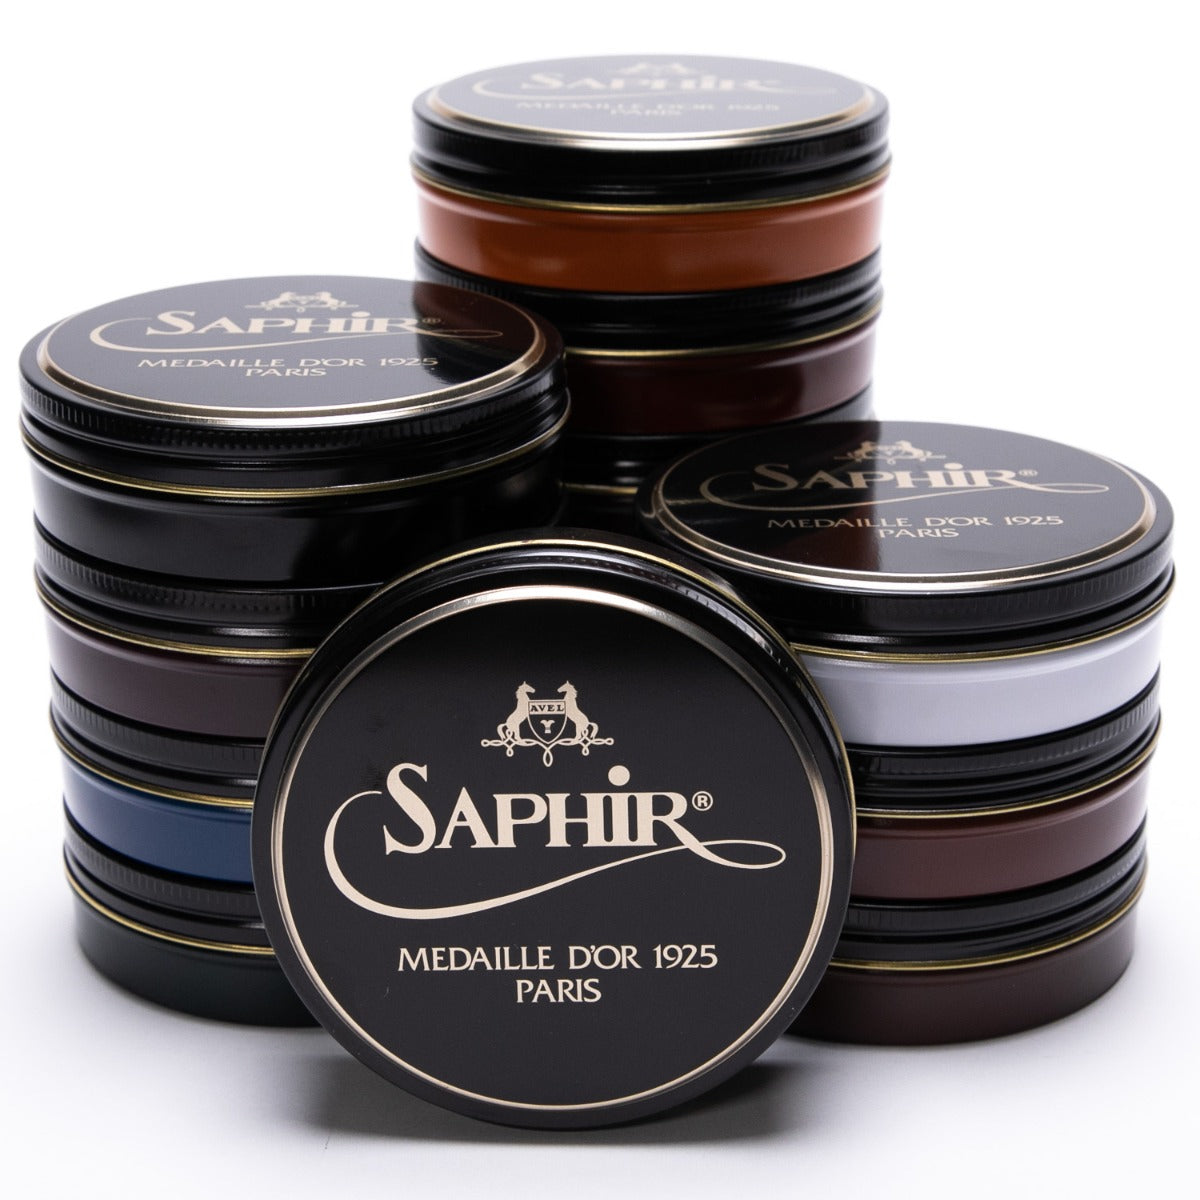 A group of tins with the word KirbyAllison.com on them, containing Saphir Pate de Luxe Wax Shoe Polish 100 ml for achieving a high-gloss shine.